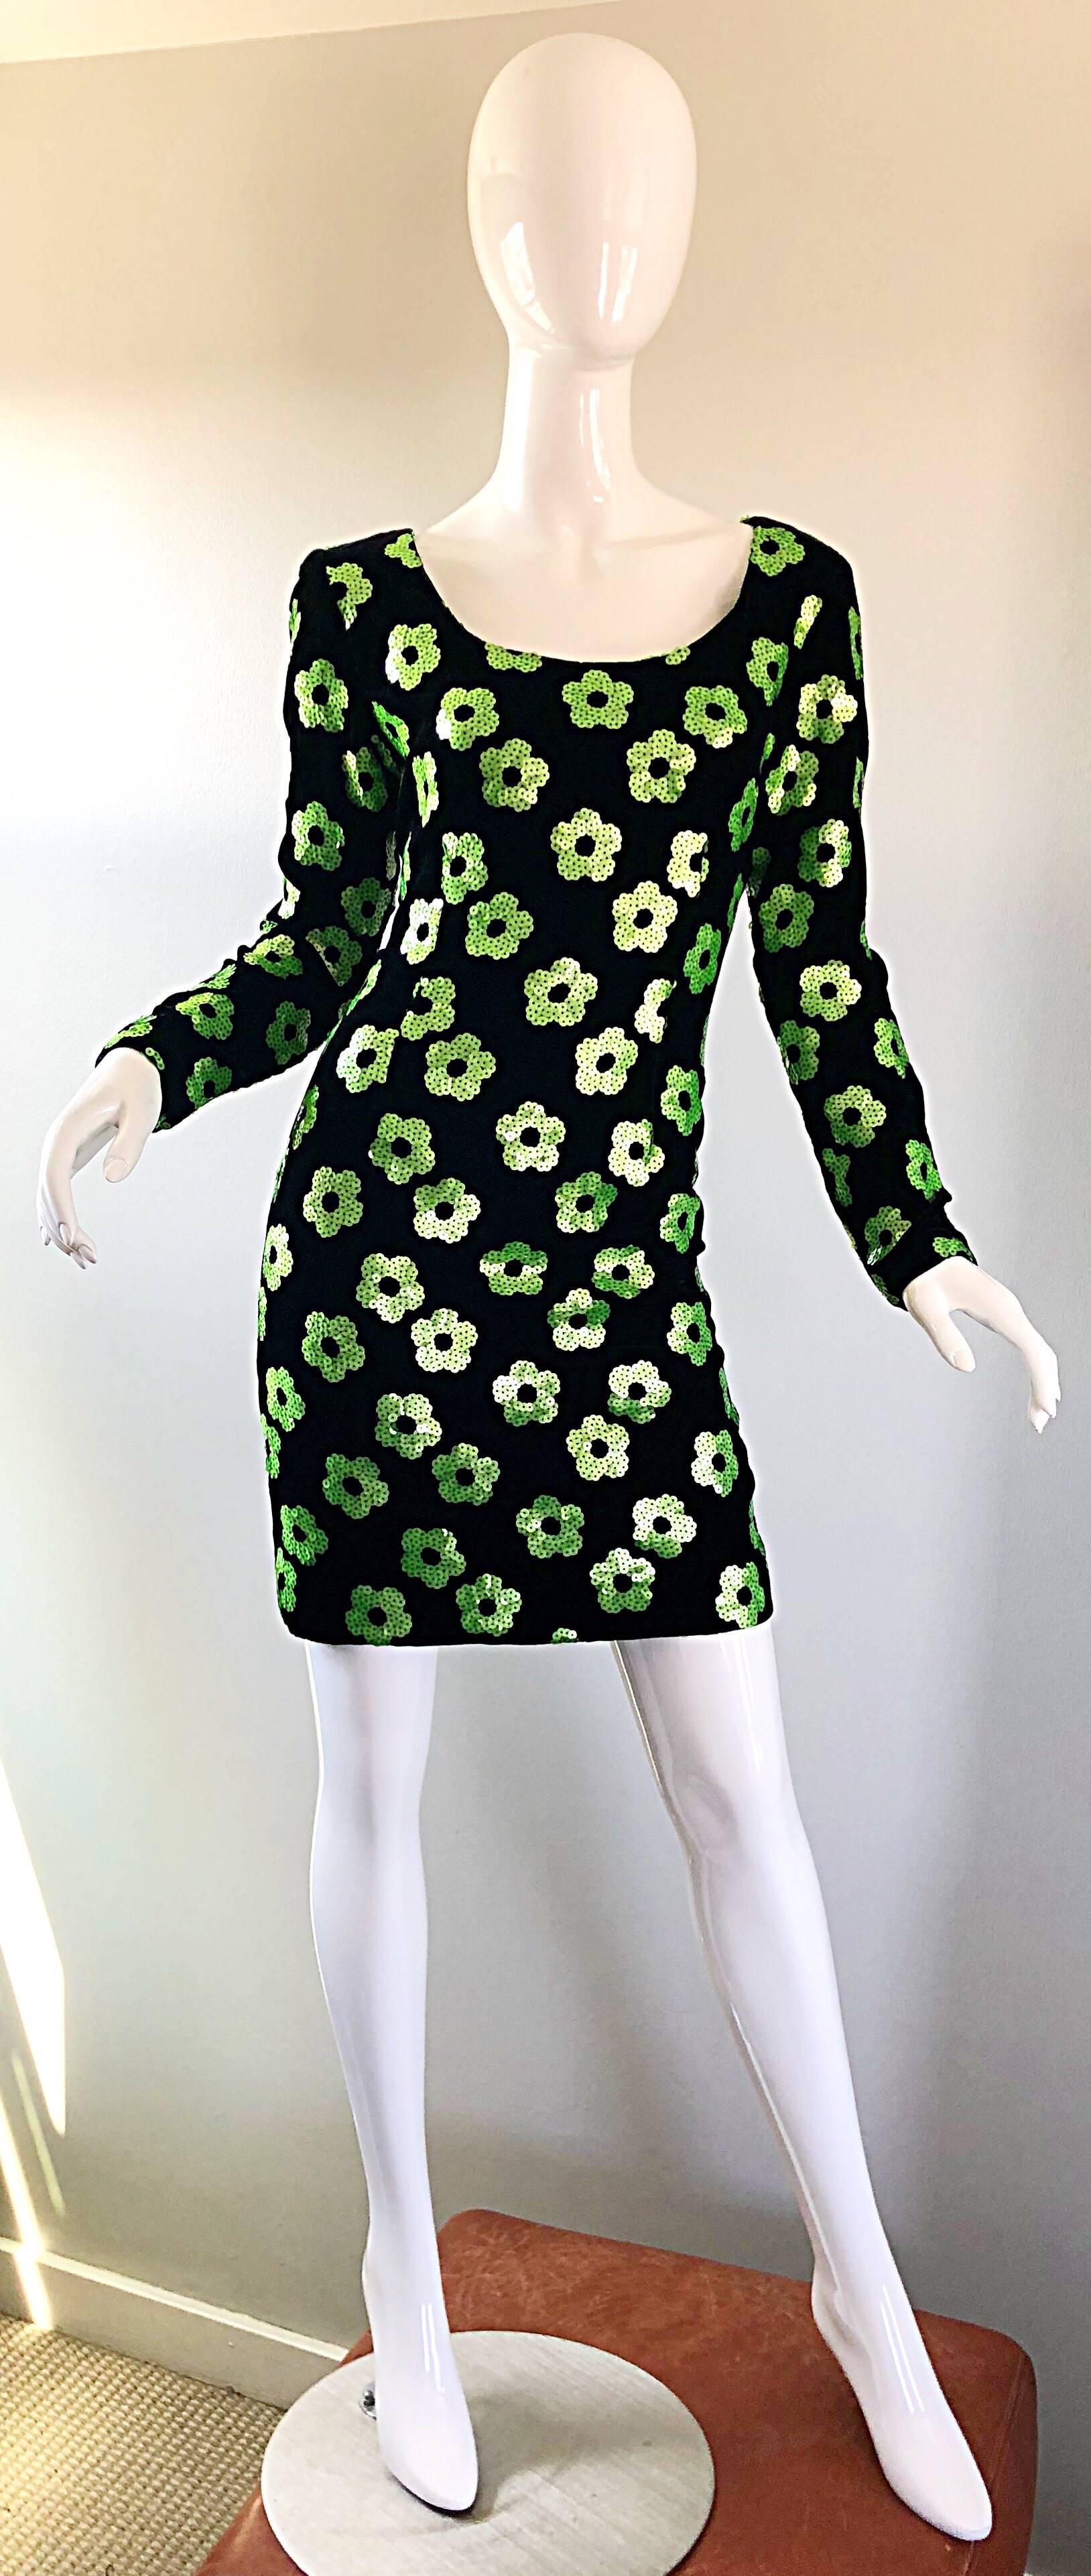 Amazing vintage 90s STEVE STOLMAN black and neon green sequined long sleeve velvet bodycon dress! Slimming lines, with a soft lightweight cotton velvet. Thousands of hand-sewn neon green sequins in the shape of flowers throughout the entire dress.